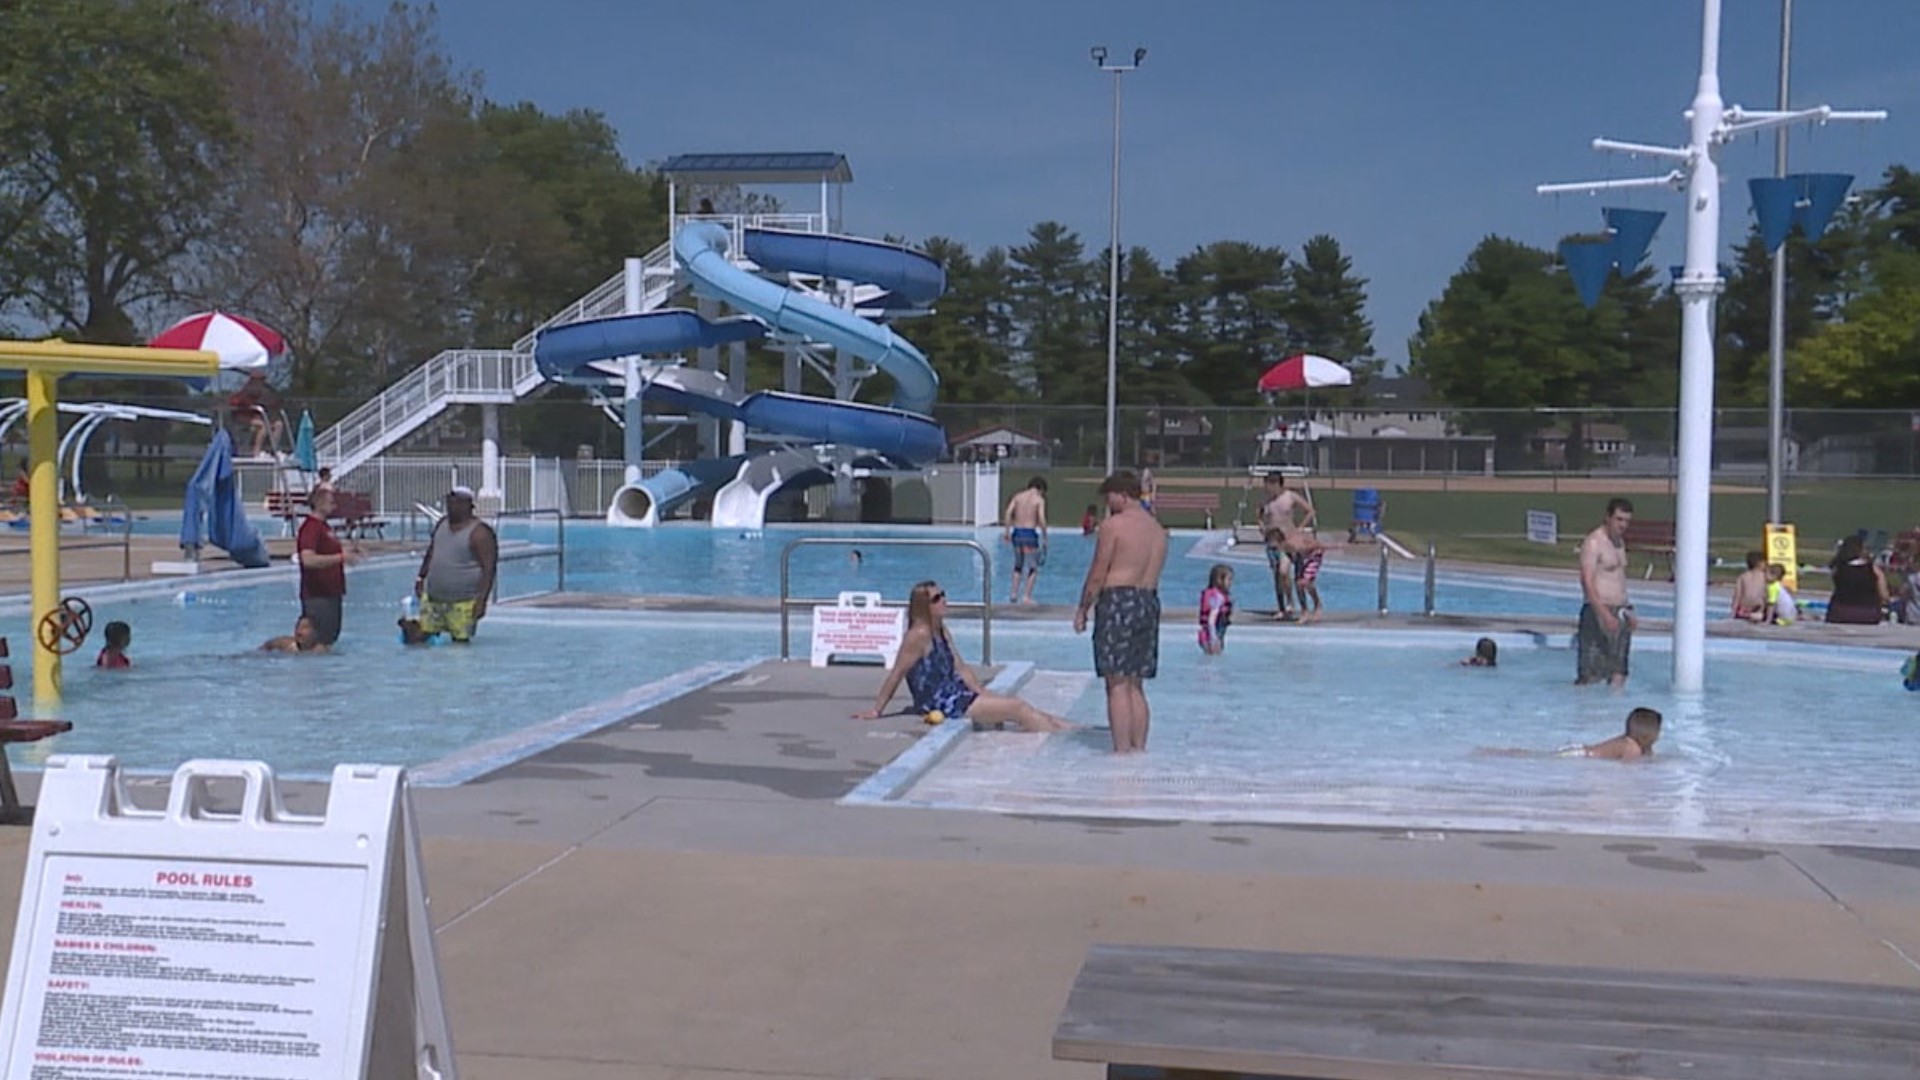 Community pools throughout Central PA welcomed in patrons to kick off the summer season.